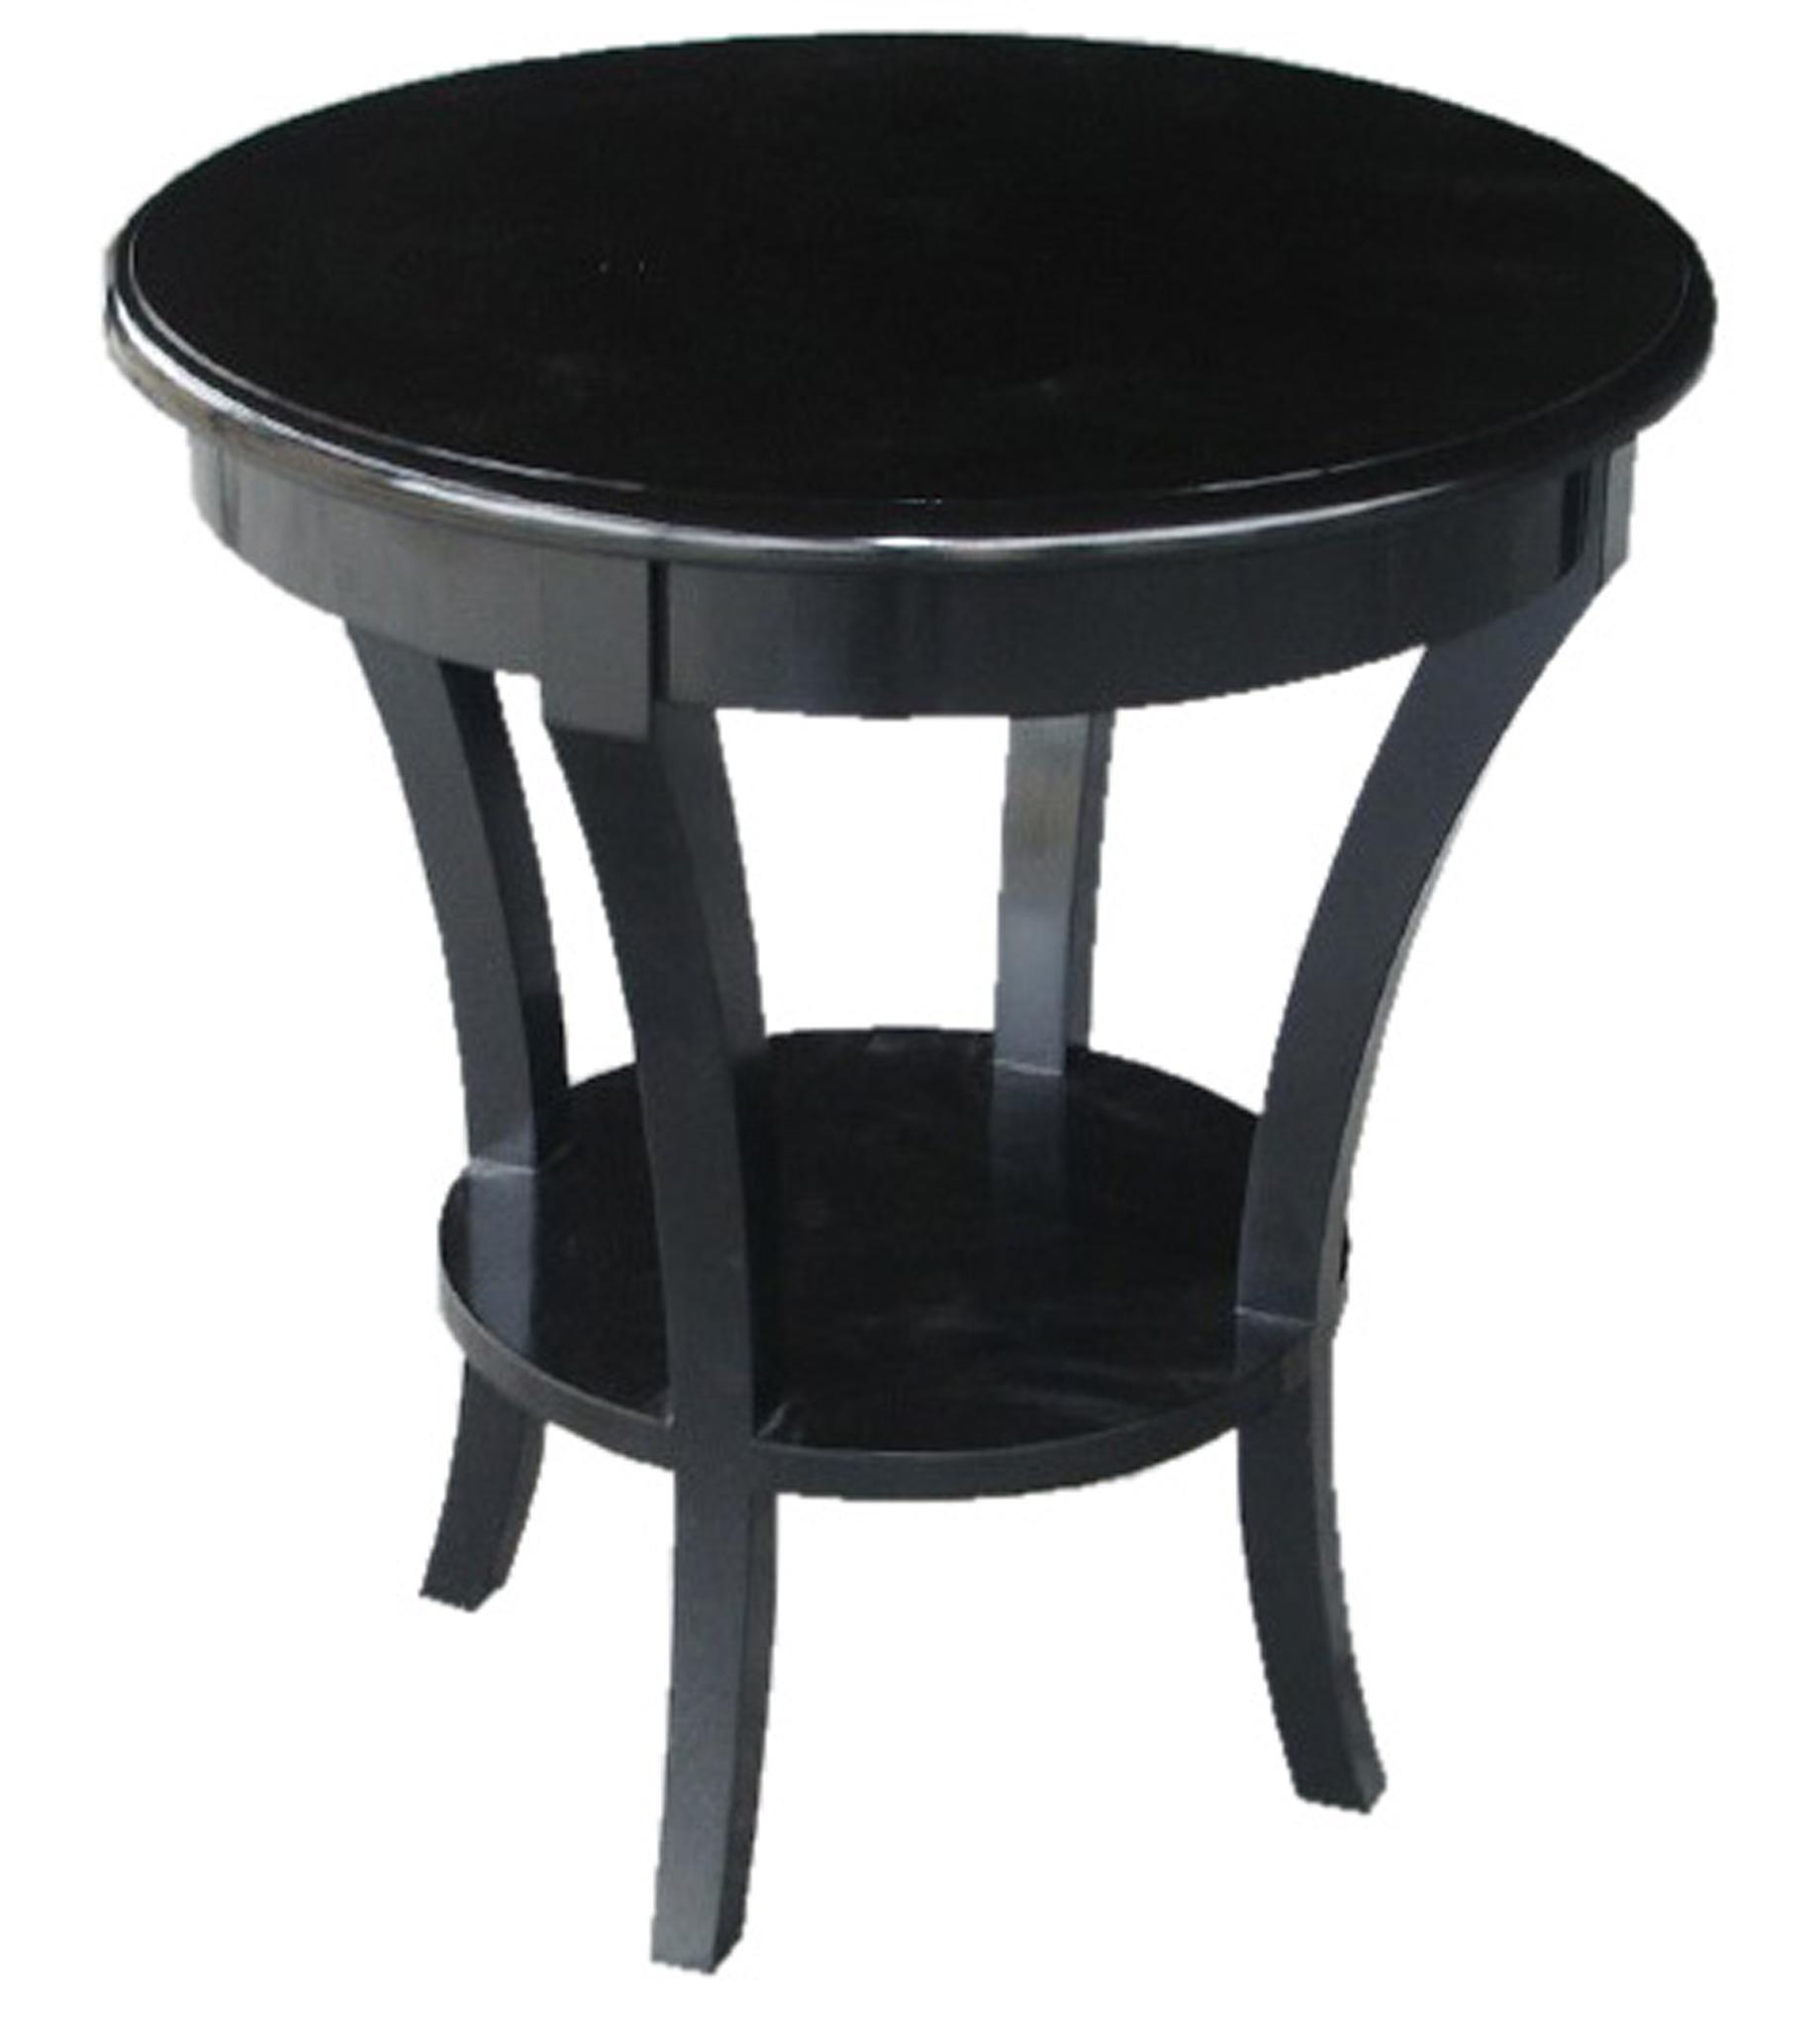 small round black side table designs drum accent inch hairpin legs white tablecloths skinny glass temple jar lamps repurposed furniture wicker garden and chairs aluminum marble